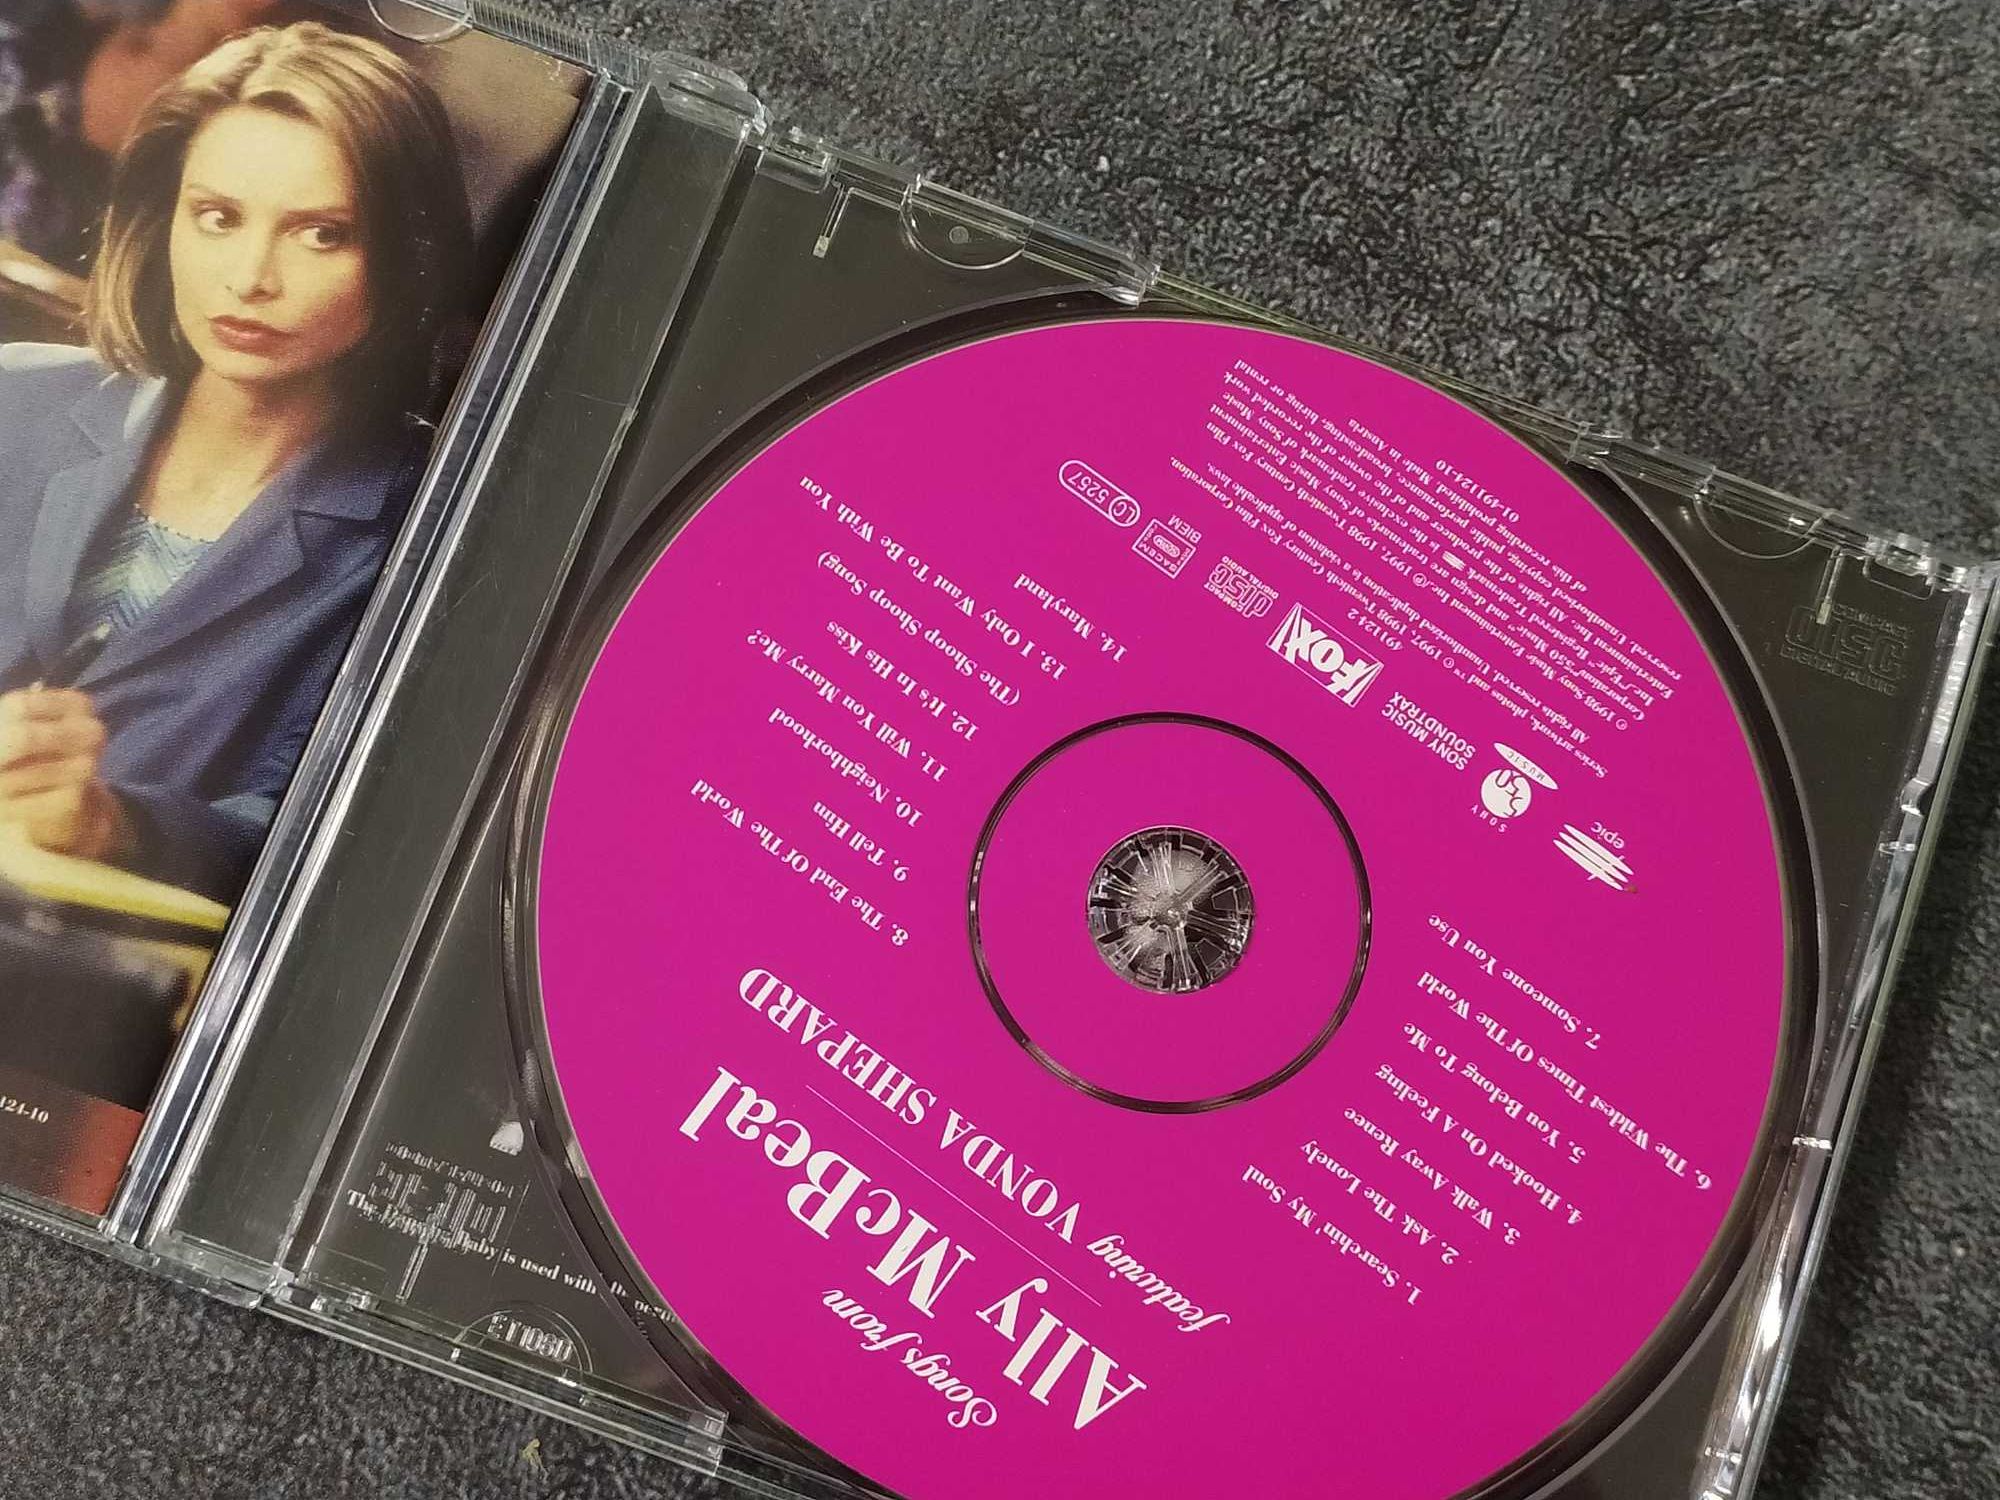 Songs from Ally McBeal featuring Vonda Shepard OST -CD Wrocław